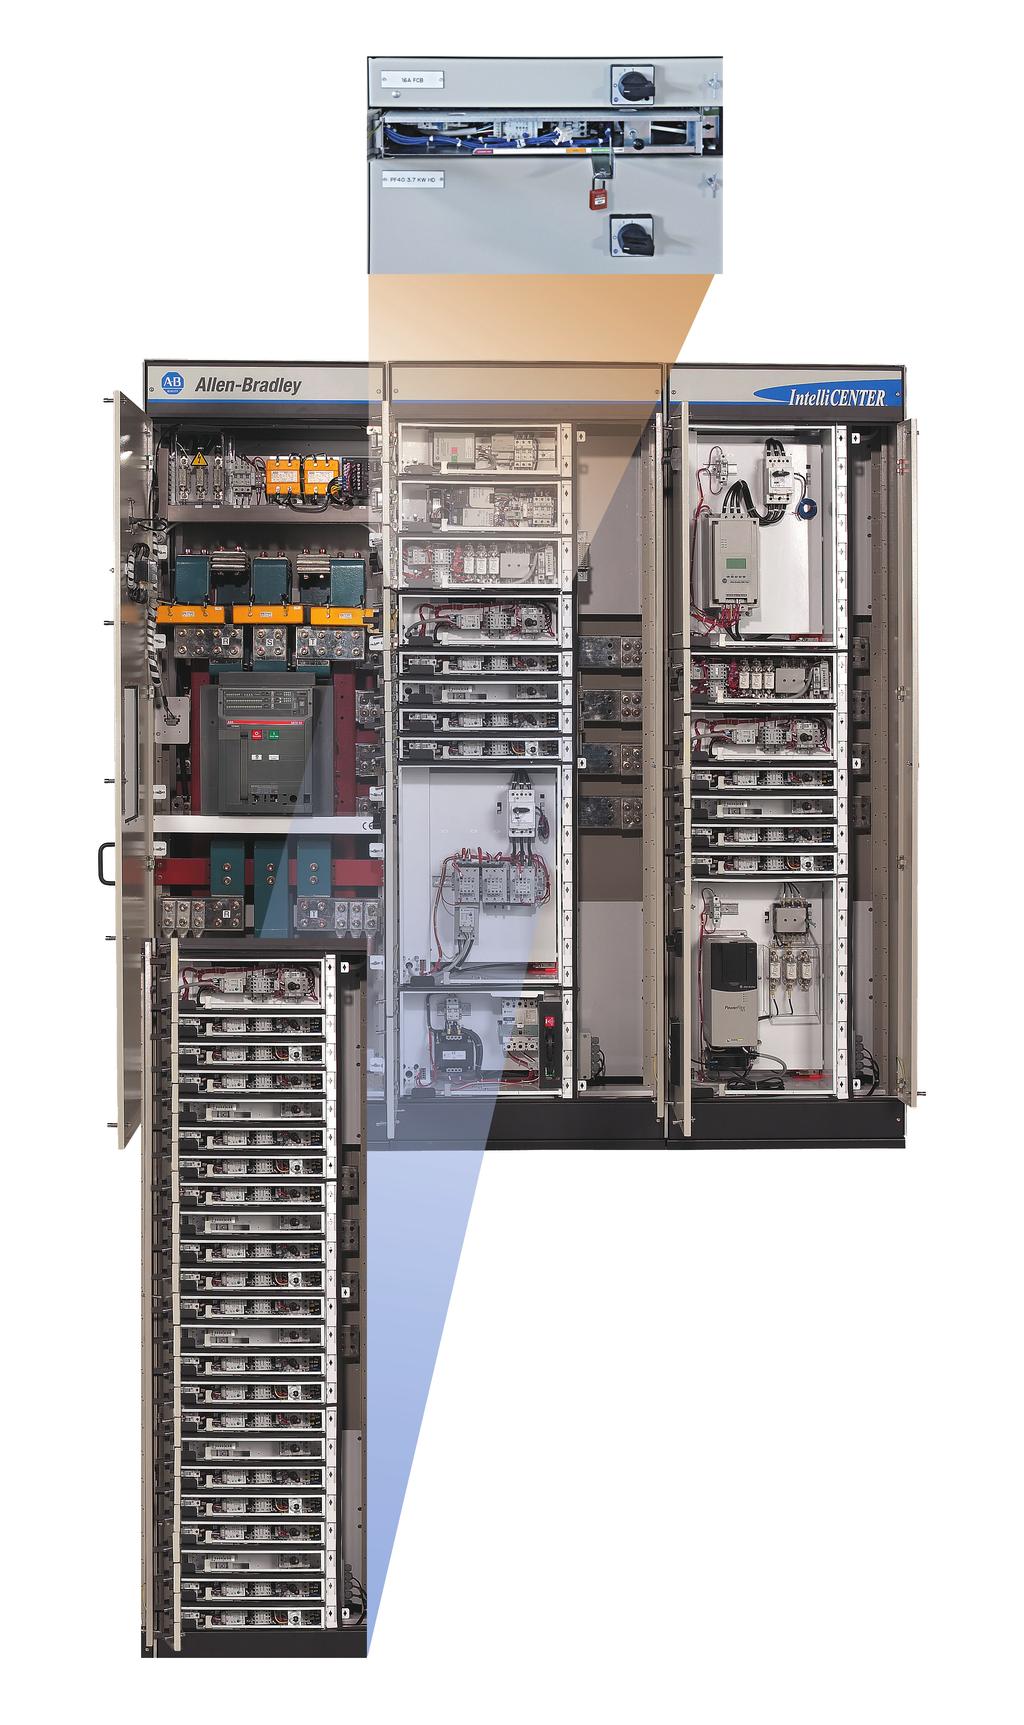 Unit Features Disconnected position completely disconnects power and control connections Unit can be padlocked in all positions Standard Unit IntelliCENTER technology improves the intelligence of